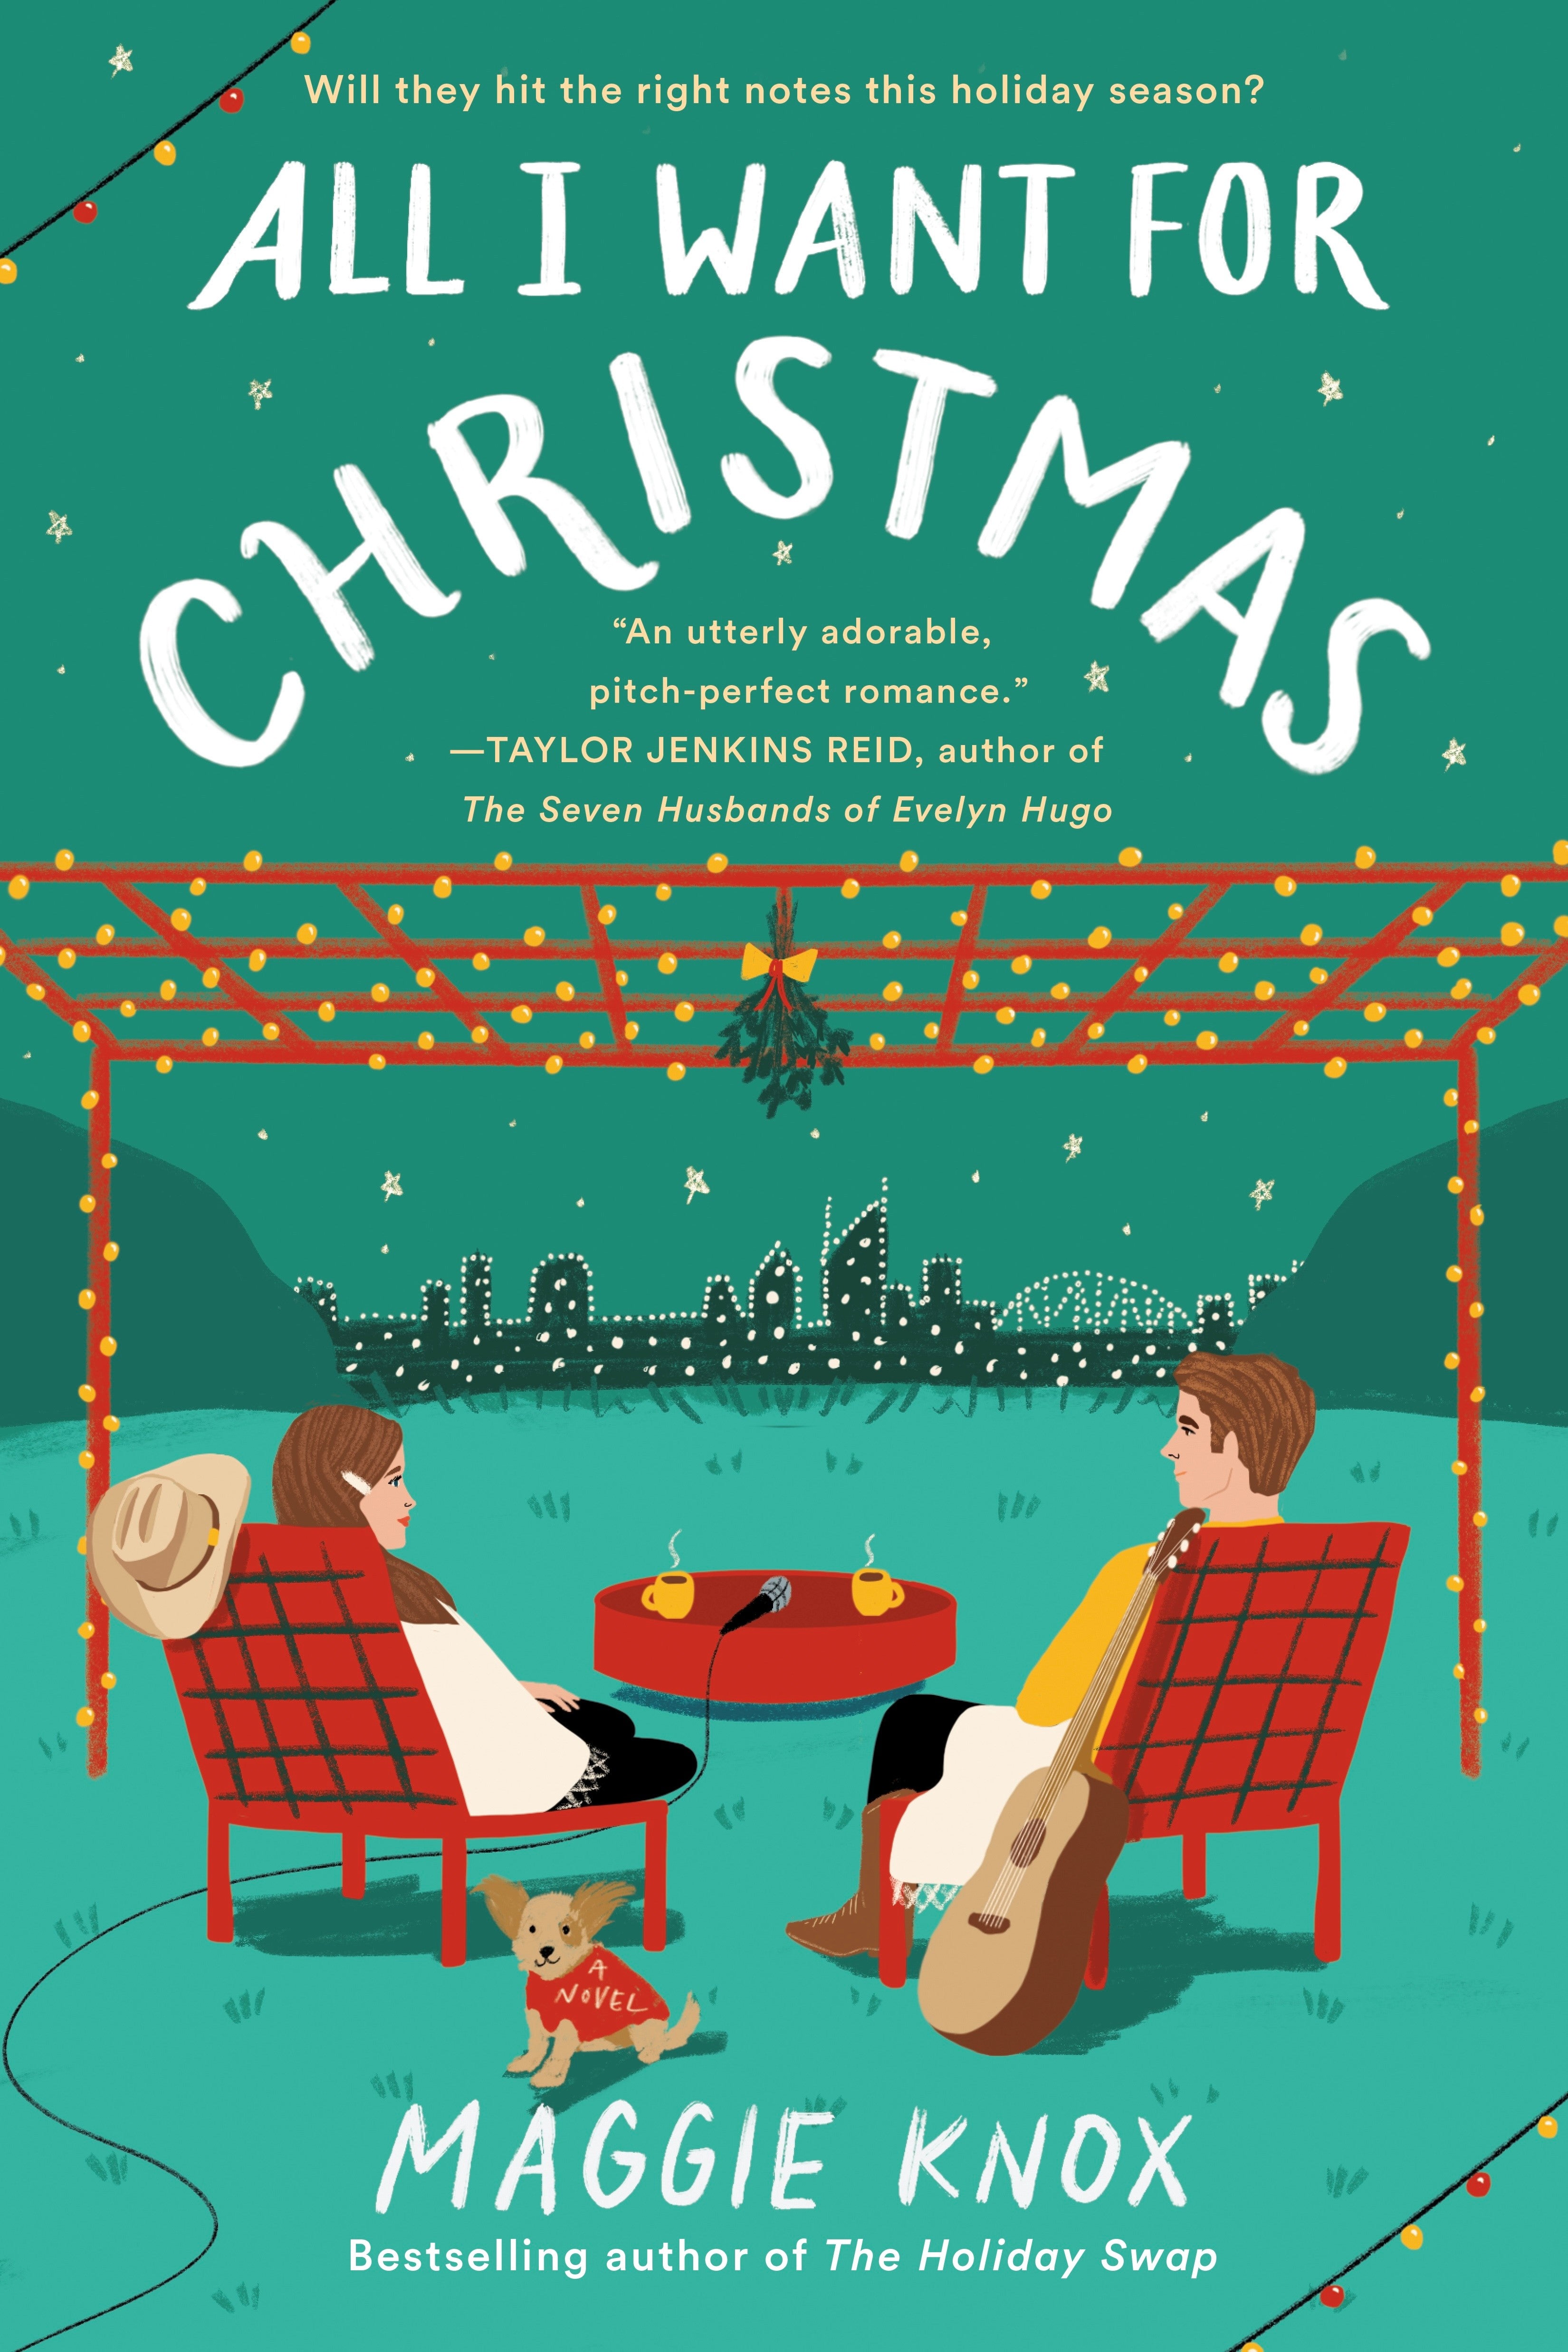 All I Want For Christmas by Maggie Knox Book Cover